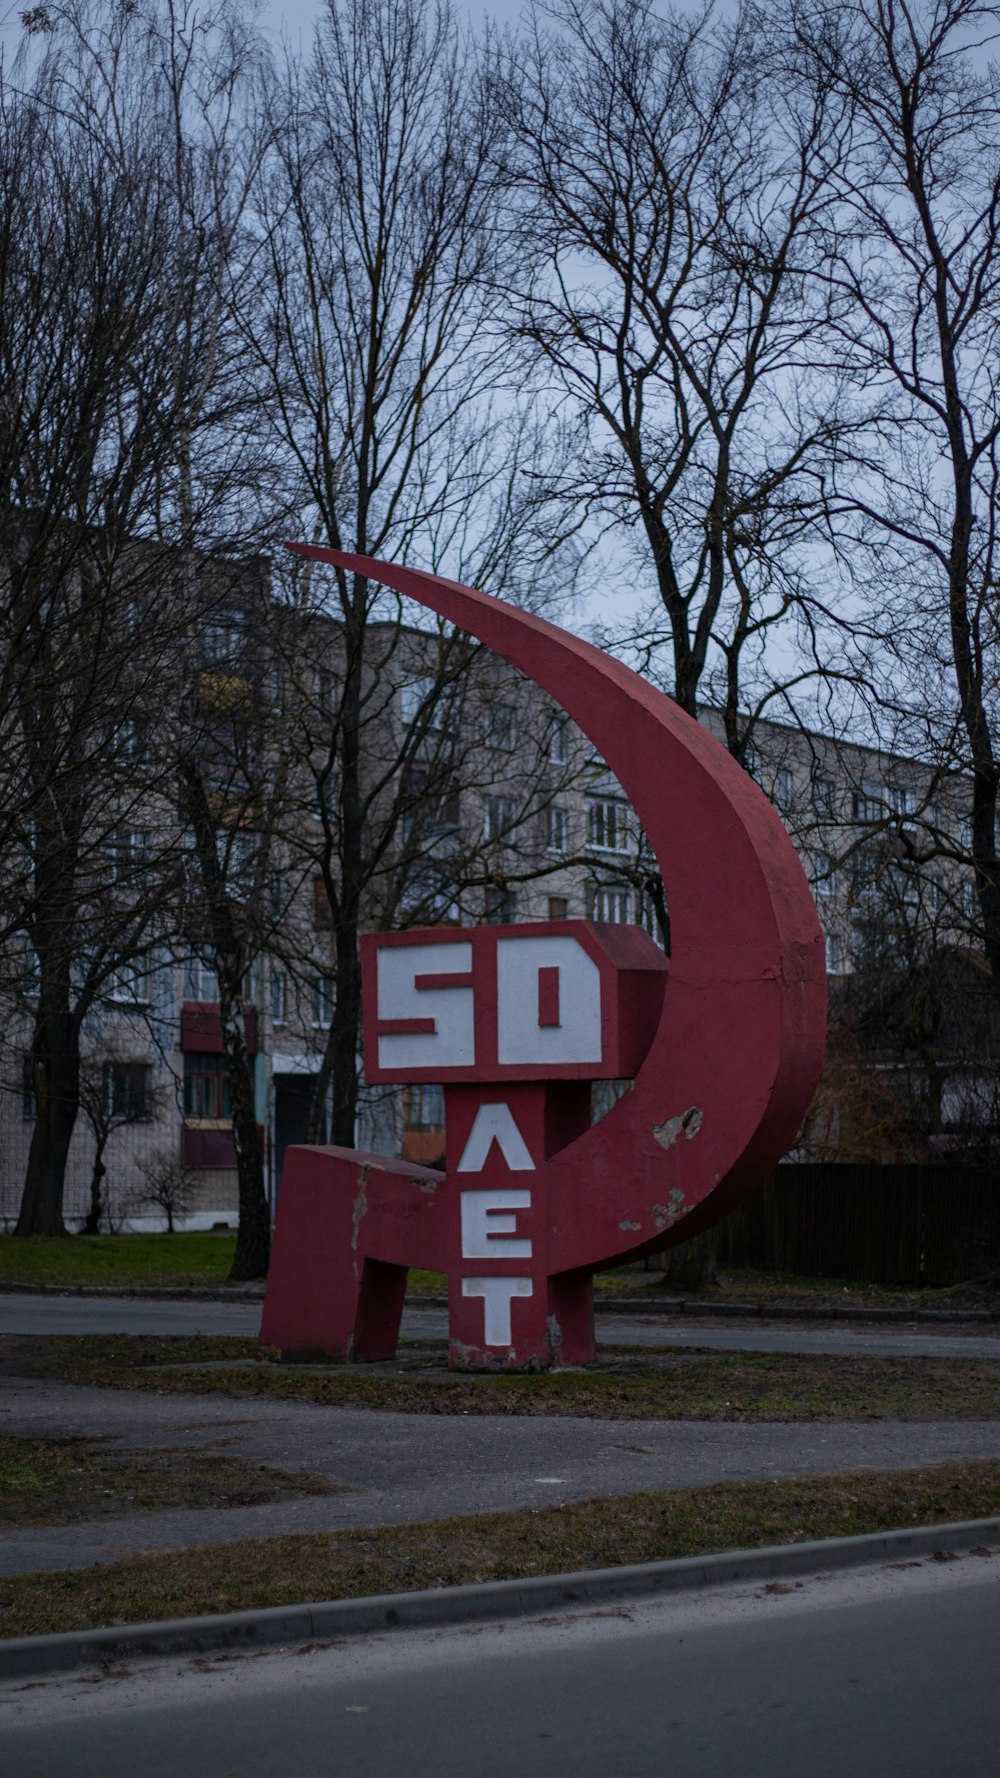 a large red sculpture sitting on the side of a road